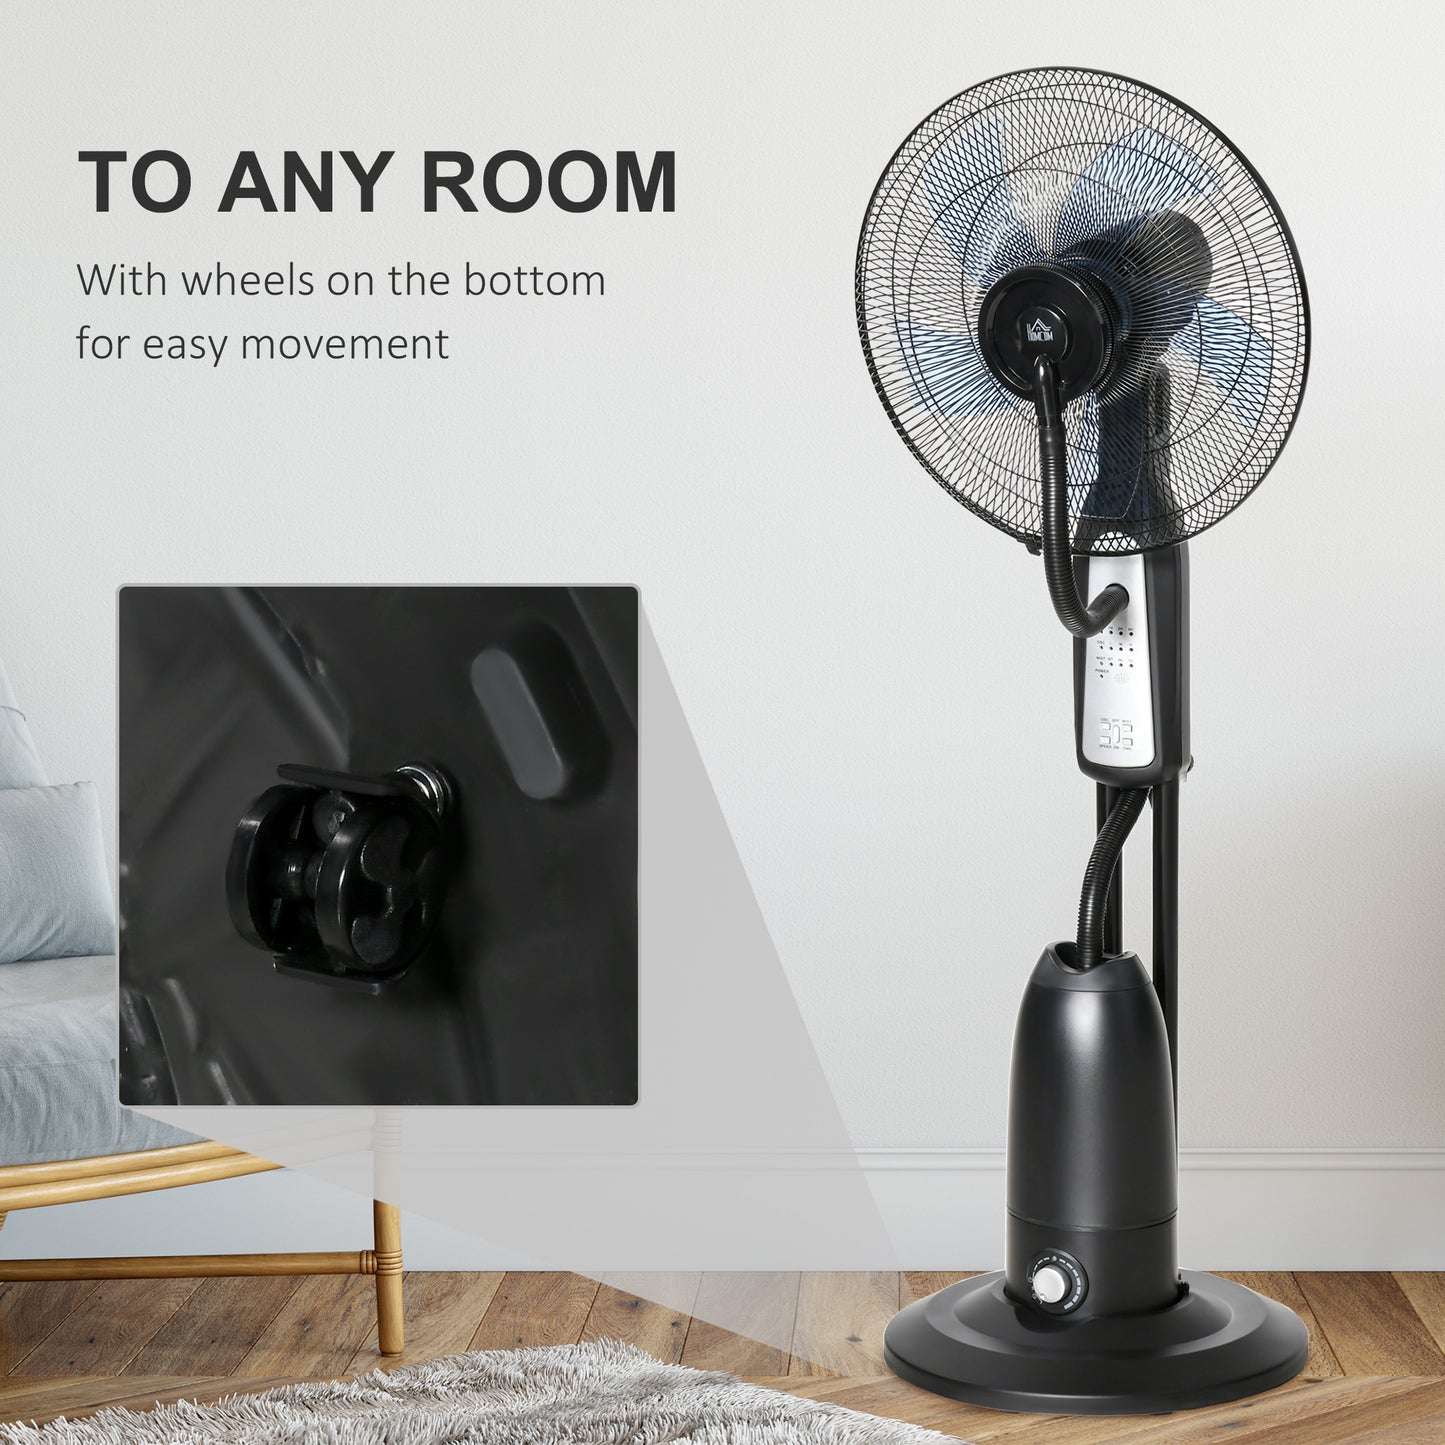 HOMCOM Pedestal Fan with Water Mist Spray, Humidifying Misting Fan, Standing Fan with 3 Speeds, 2.8L Water Tank, Timer and Remote, Black